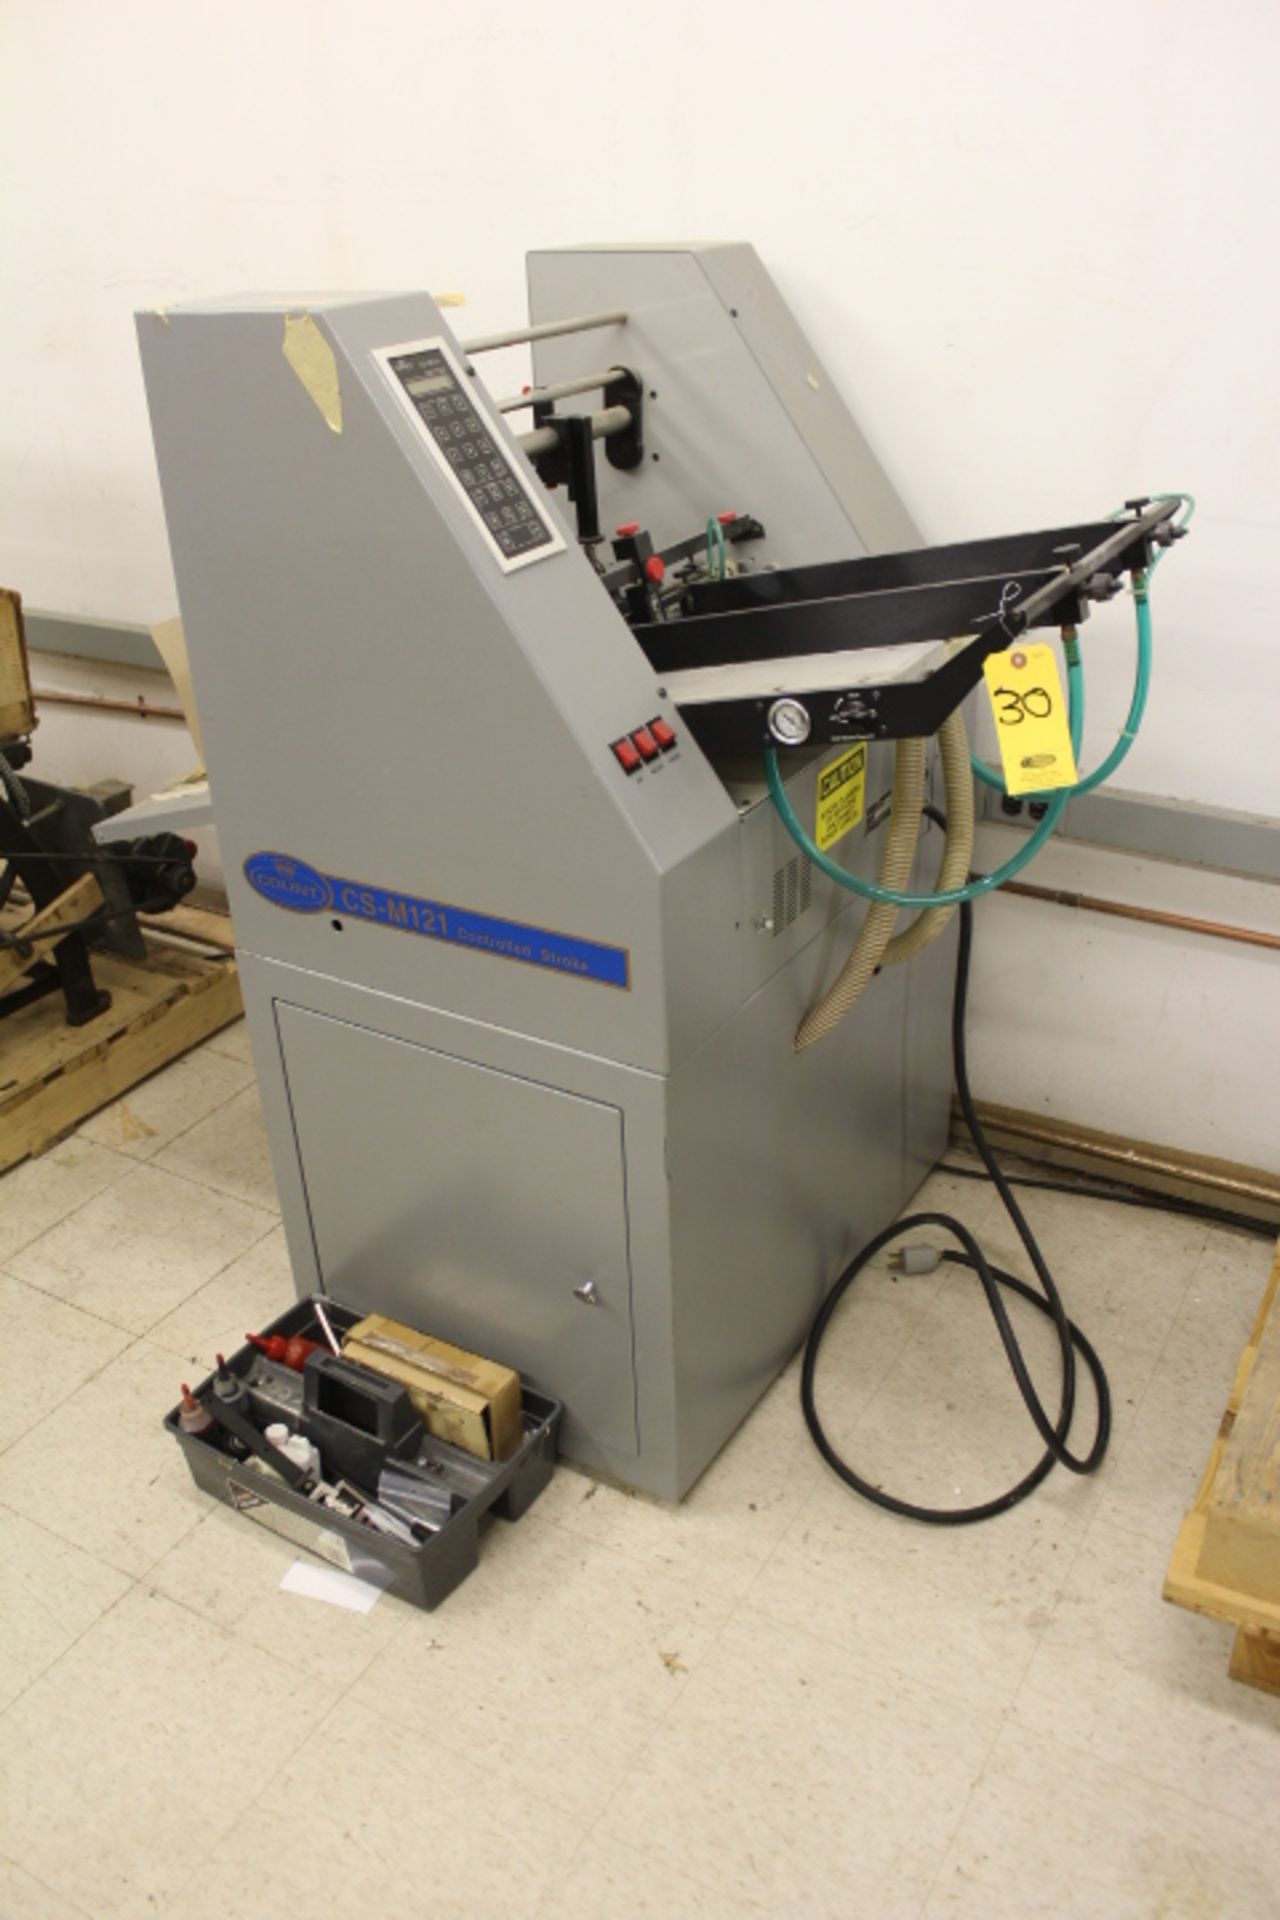 1996 COUNT CS-M121 NUMBERING MACHINE WITH 2-REINER HEADS AND 2 PERF AND SCORE WHEELS, 11 X 17 MAX